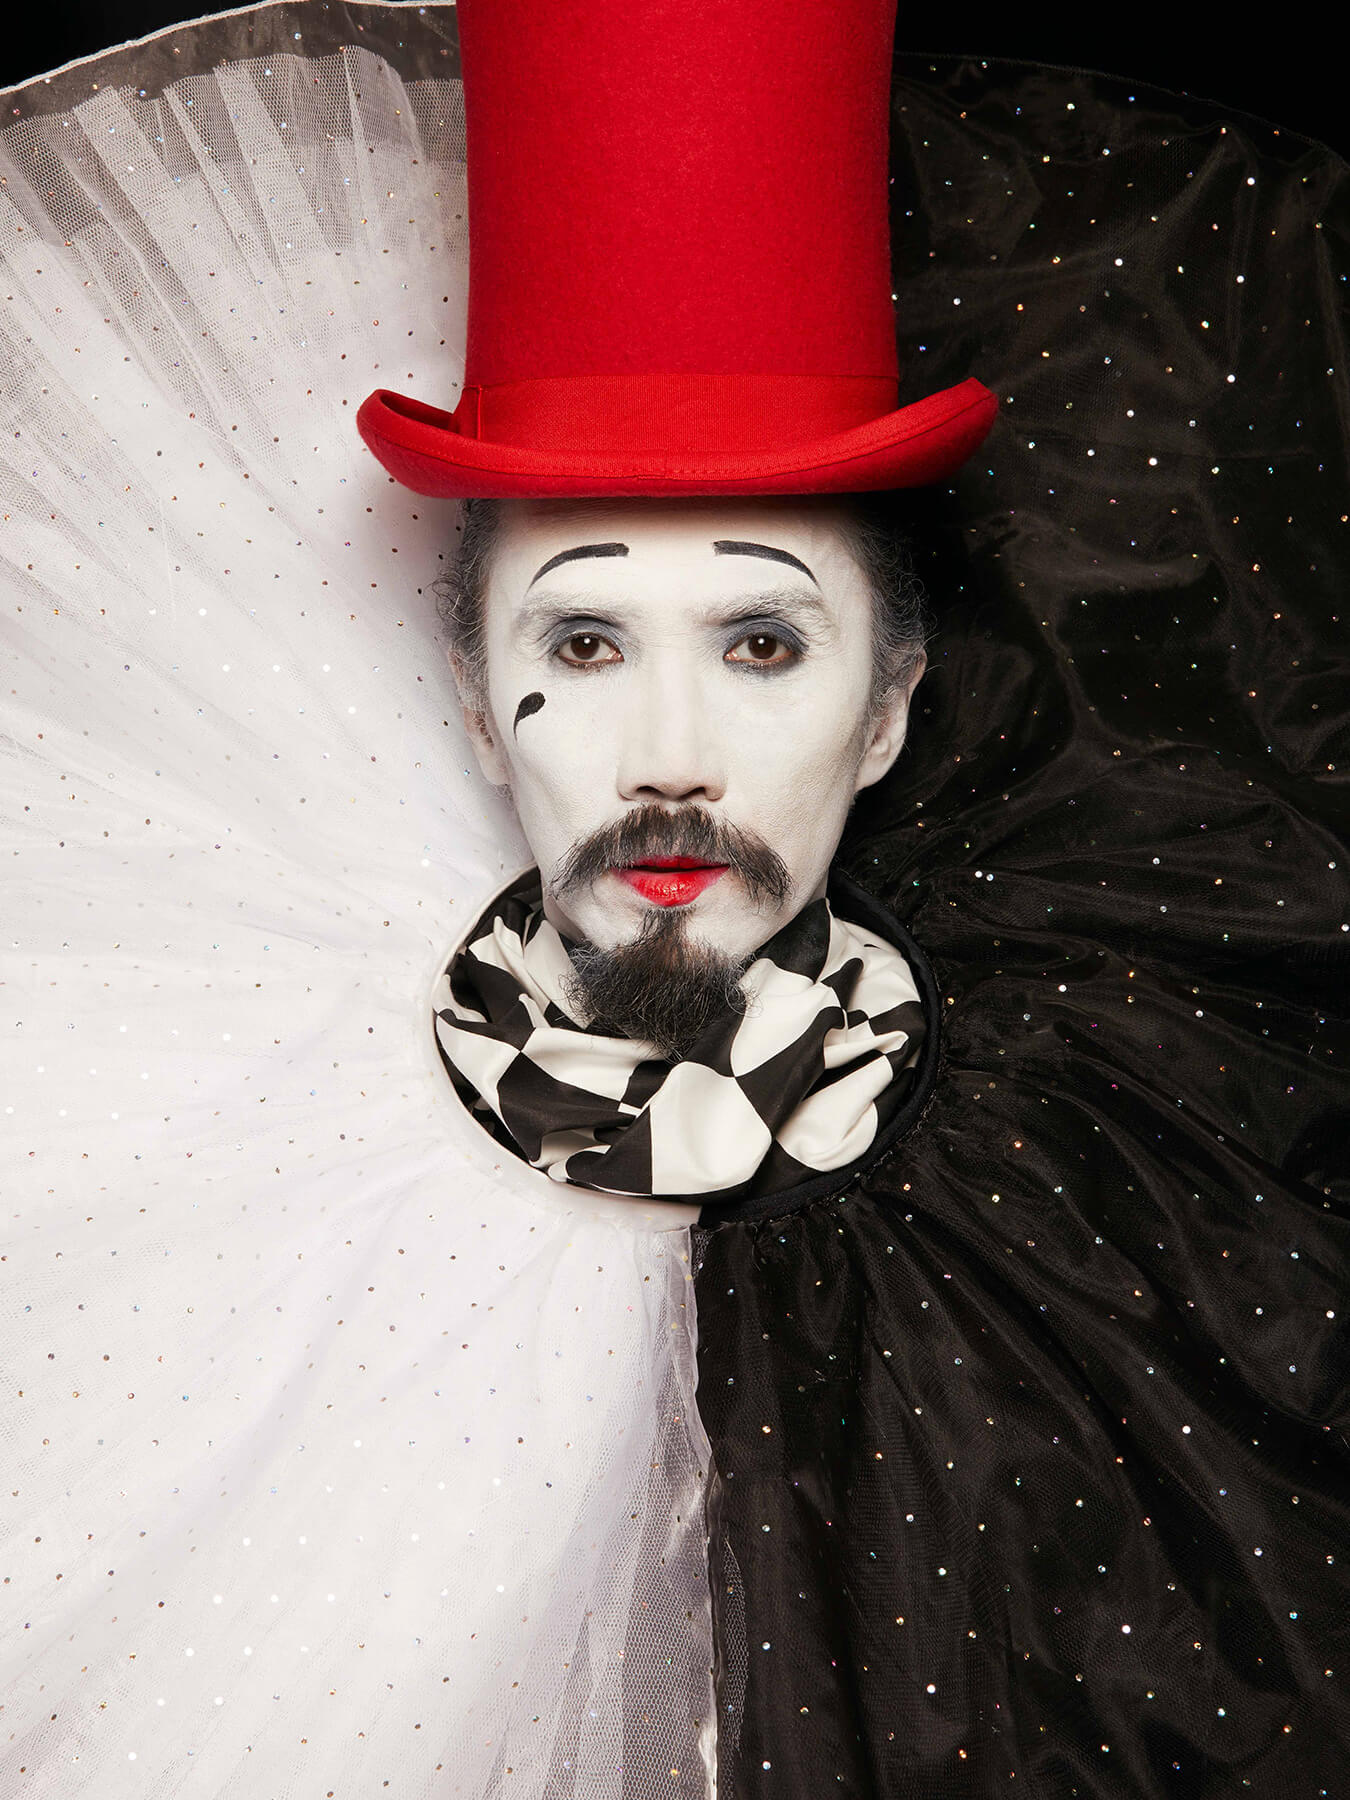 5 Jan 2018 Derong is photographed as Pierrot, the sad clown